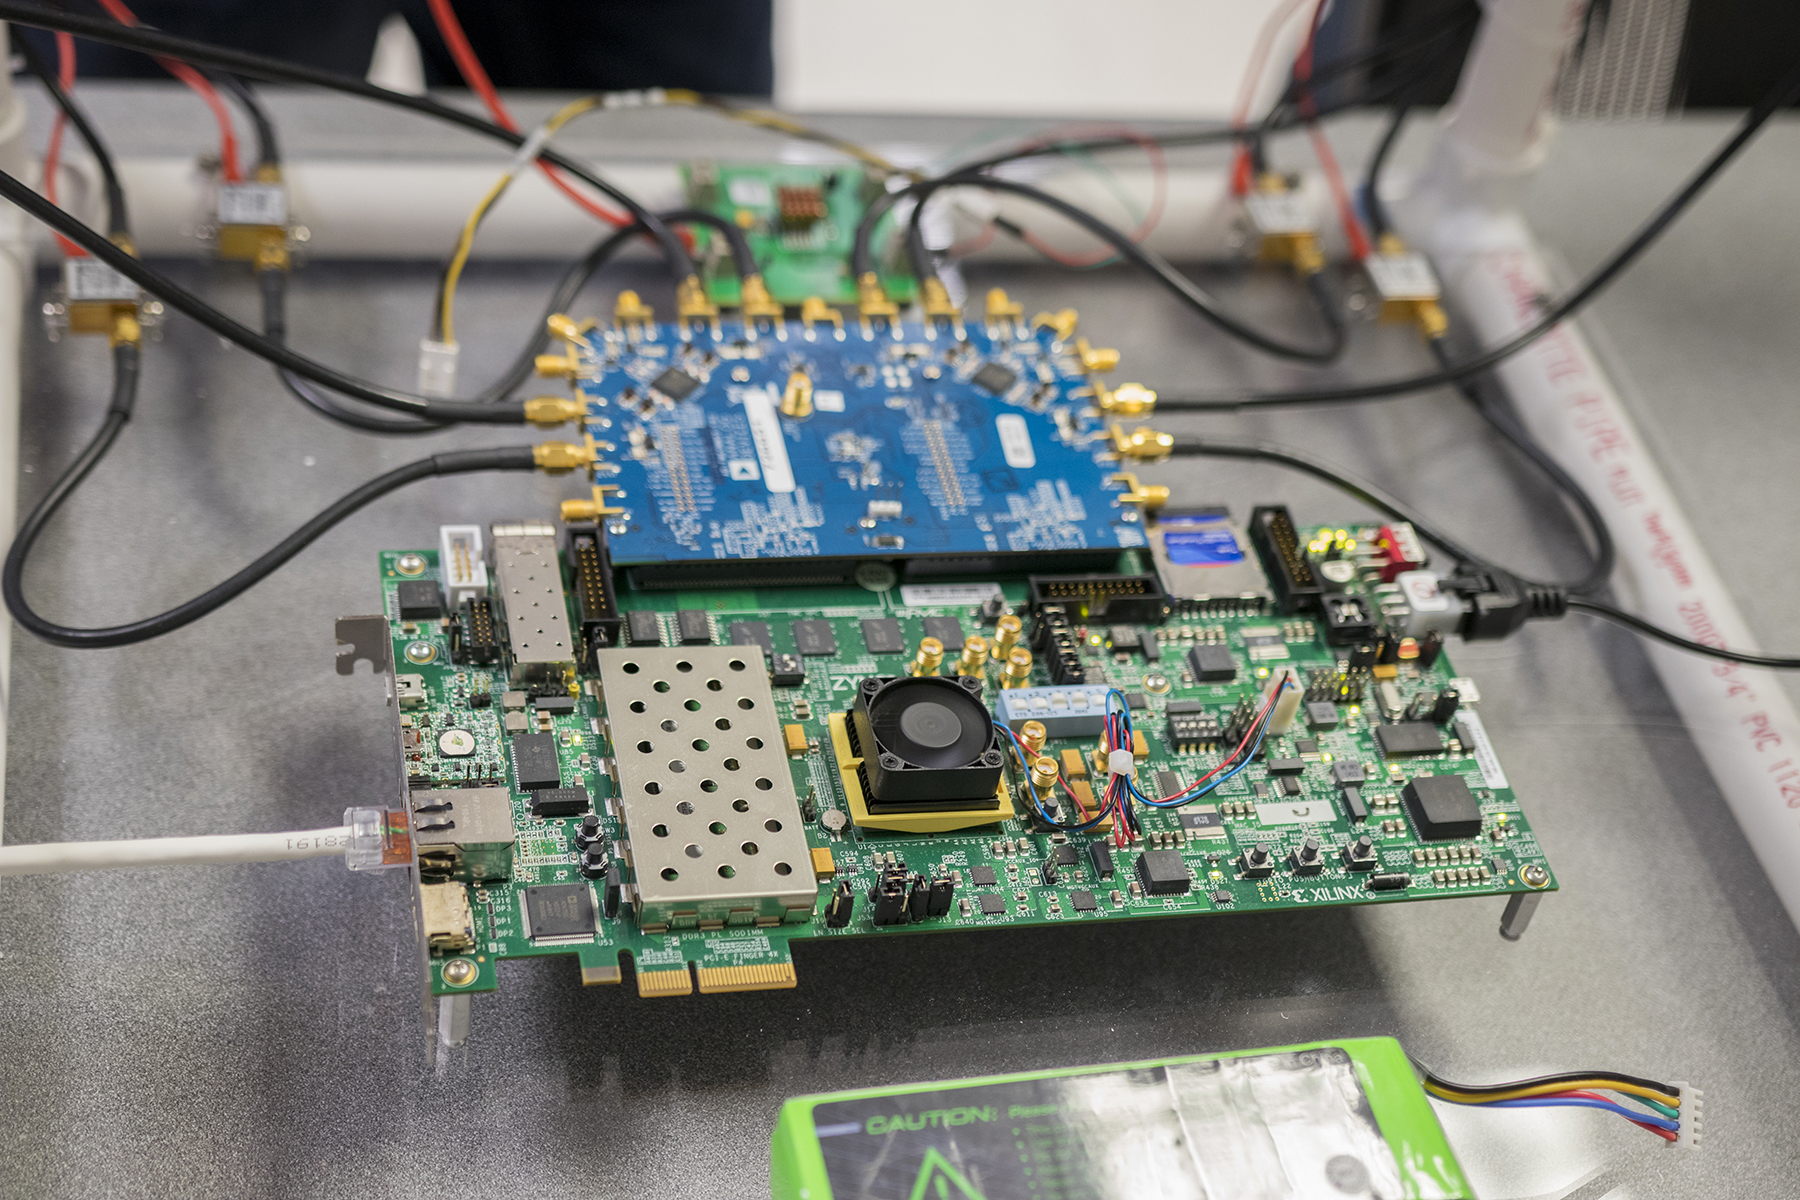 As part of a recently announced national microelectronics research program, an ASU team will create a conceptual framework, software tools and integrated circuit examples for new, more power-efficient and capable computer processing architectures. Photo: Marco-Alexis Chaira/ASU